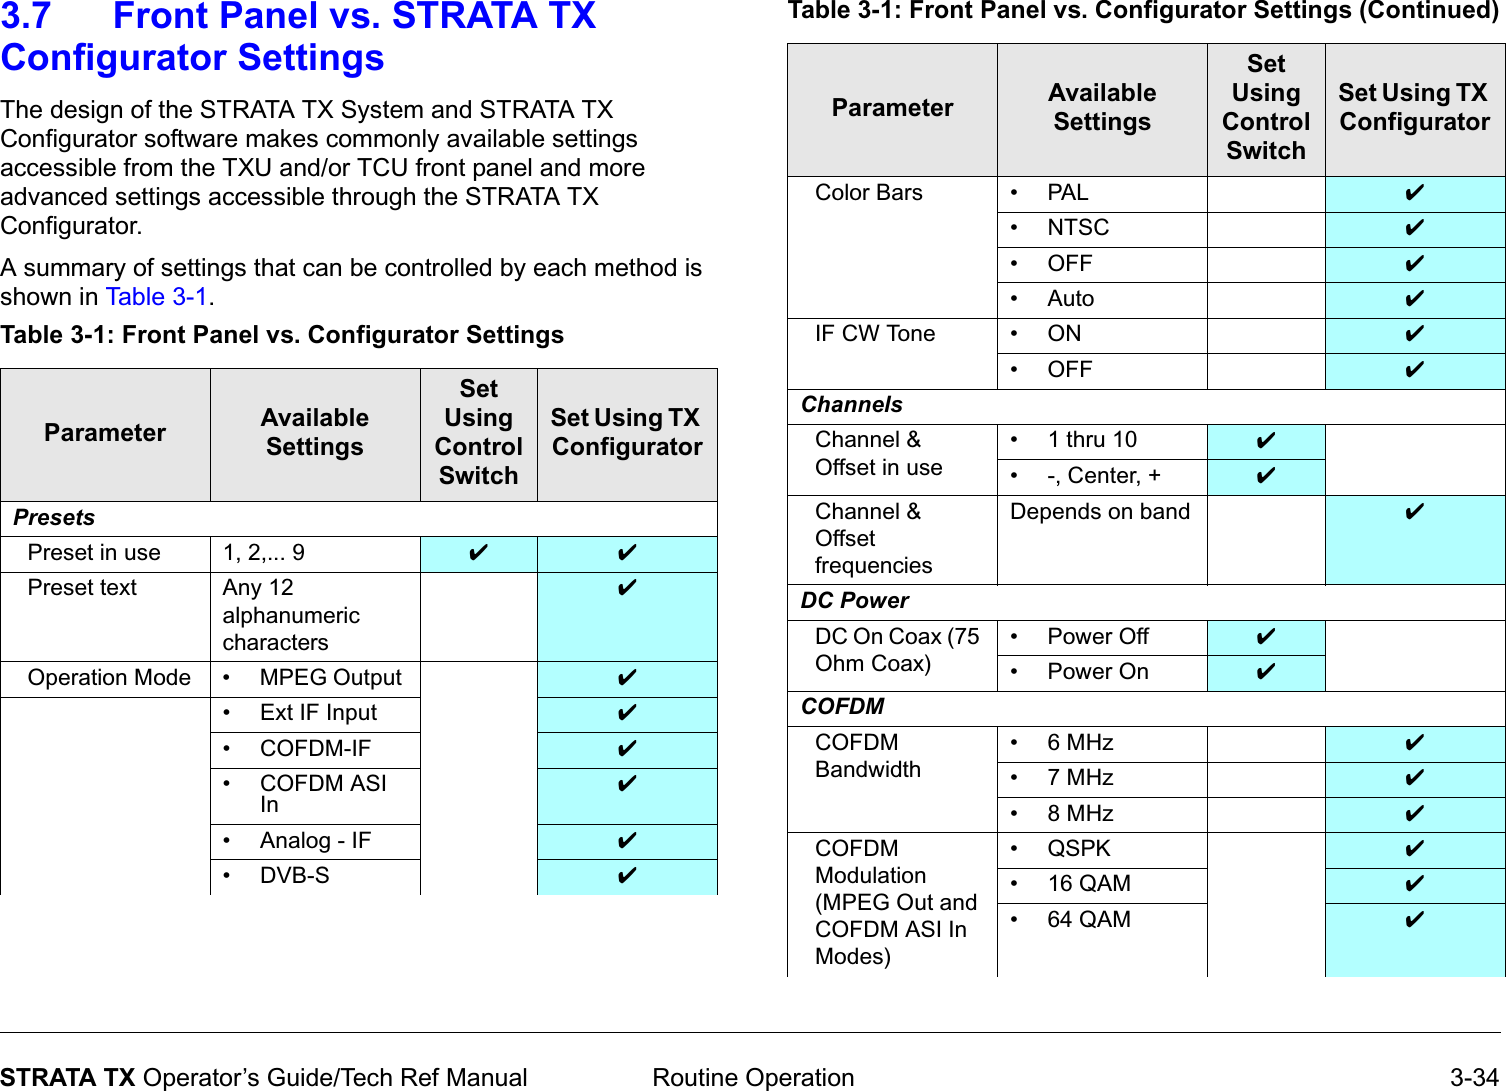  Routine Operation 3-34STRATA TX Operator’s Guide/Tech Ref Manual3.7 Front Panel vs. STRATA TX Configurator SettingsThe design of the STRATA TX System and STRATA TX Configurator software makes commonly available settings accessible from the TXU and/or TCU front panel and more advanced settings accessible through the STRATA TX Configurator.A summary of settings that can be controlled by each method is shown in Table 3-1.Table 3-1: Front Panel vs. Configurator Settings Parameter AvailableSettingsSet Using Control SwitchSet Using TX ConfiguratorPresetsPreset in use 1, 2,... 9 ✔ ✔Preset text Any 12 alphanumeric characters✔Operation Mode • MPEG Output  ✔• Ext IF Input ✔•COFDM-IF ✔• COFDM ASI In✔• Analog - IF ✔• DVB-S ✔Color Bars • PAL ✔•NTSC ✔•OFF ✔•Auto ✔IF CW Tone • ON ✔•OFF ✔ChannelsChannel &amp; Offset in use• 1 thru 10 ✔• -, Center, + ✔Channel &amp; Offset frequenciesDepends on band ✔DC PowerDC On Coax (75 Ohm Coax)• Power Off ✔• Power On ✔COFDM COFDM Bandwidth•6 MHz ✔•7 MHz ✔•8 MHz ✔COFDM Modulation (MPEG Out and COFDM ASI In Modes)• QSPK ✔• 16 QAM ✔• 64 QAM ✔Table 3-1: Front Panel vs. Configurator Settings (Continued)Parameter AvailableSettingsSet Using Control SwitchSet Using TX Configurator